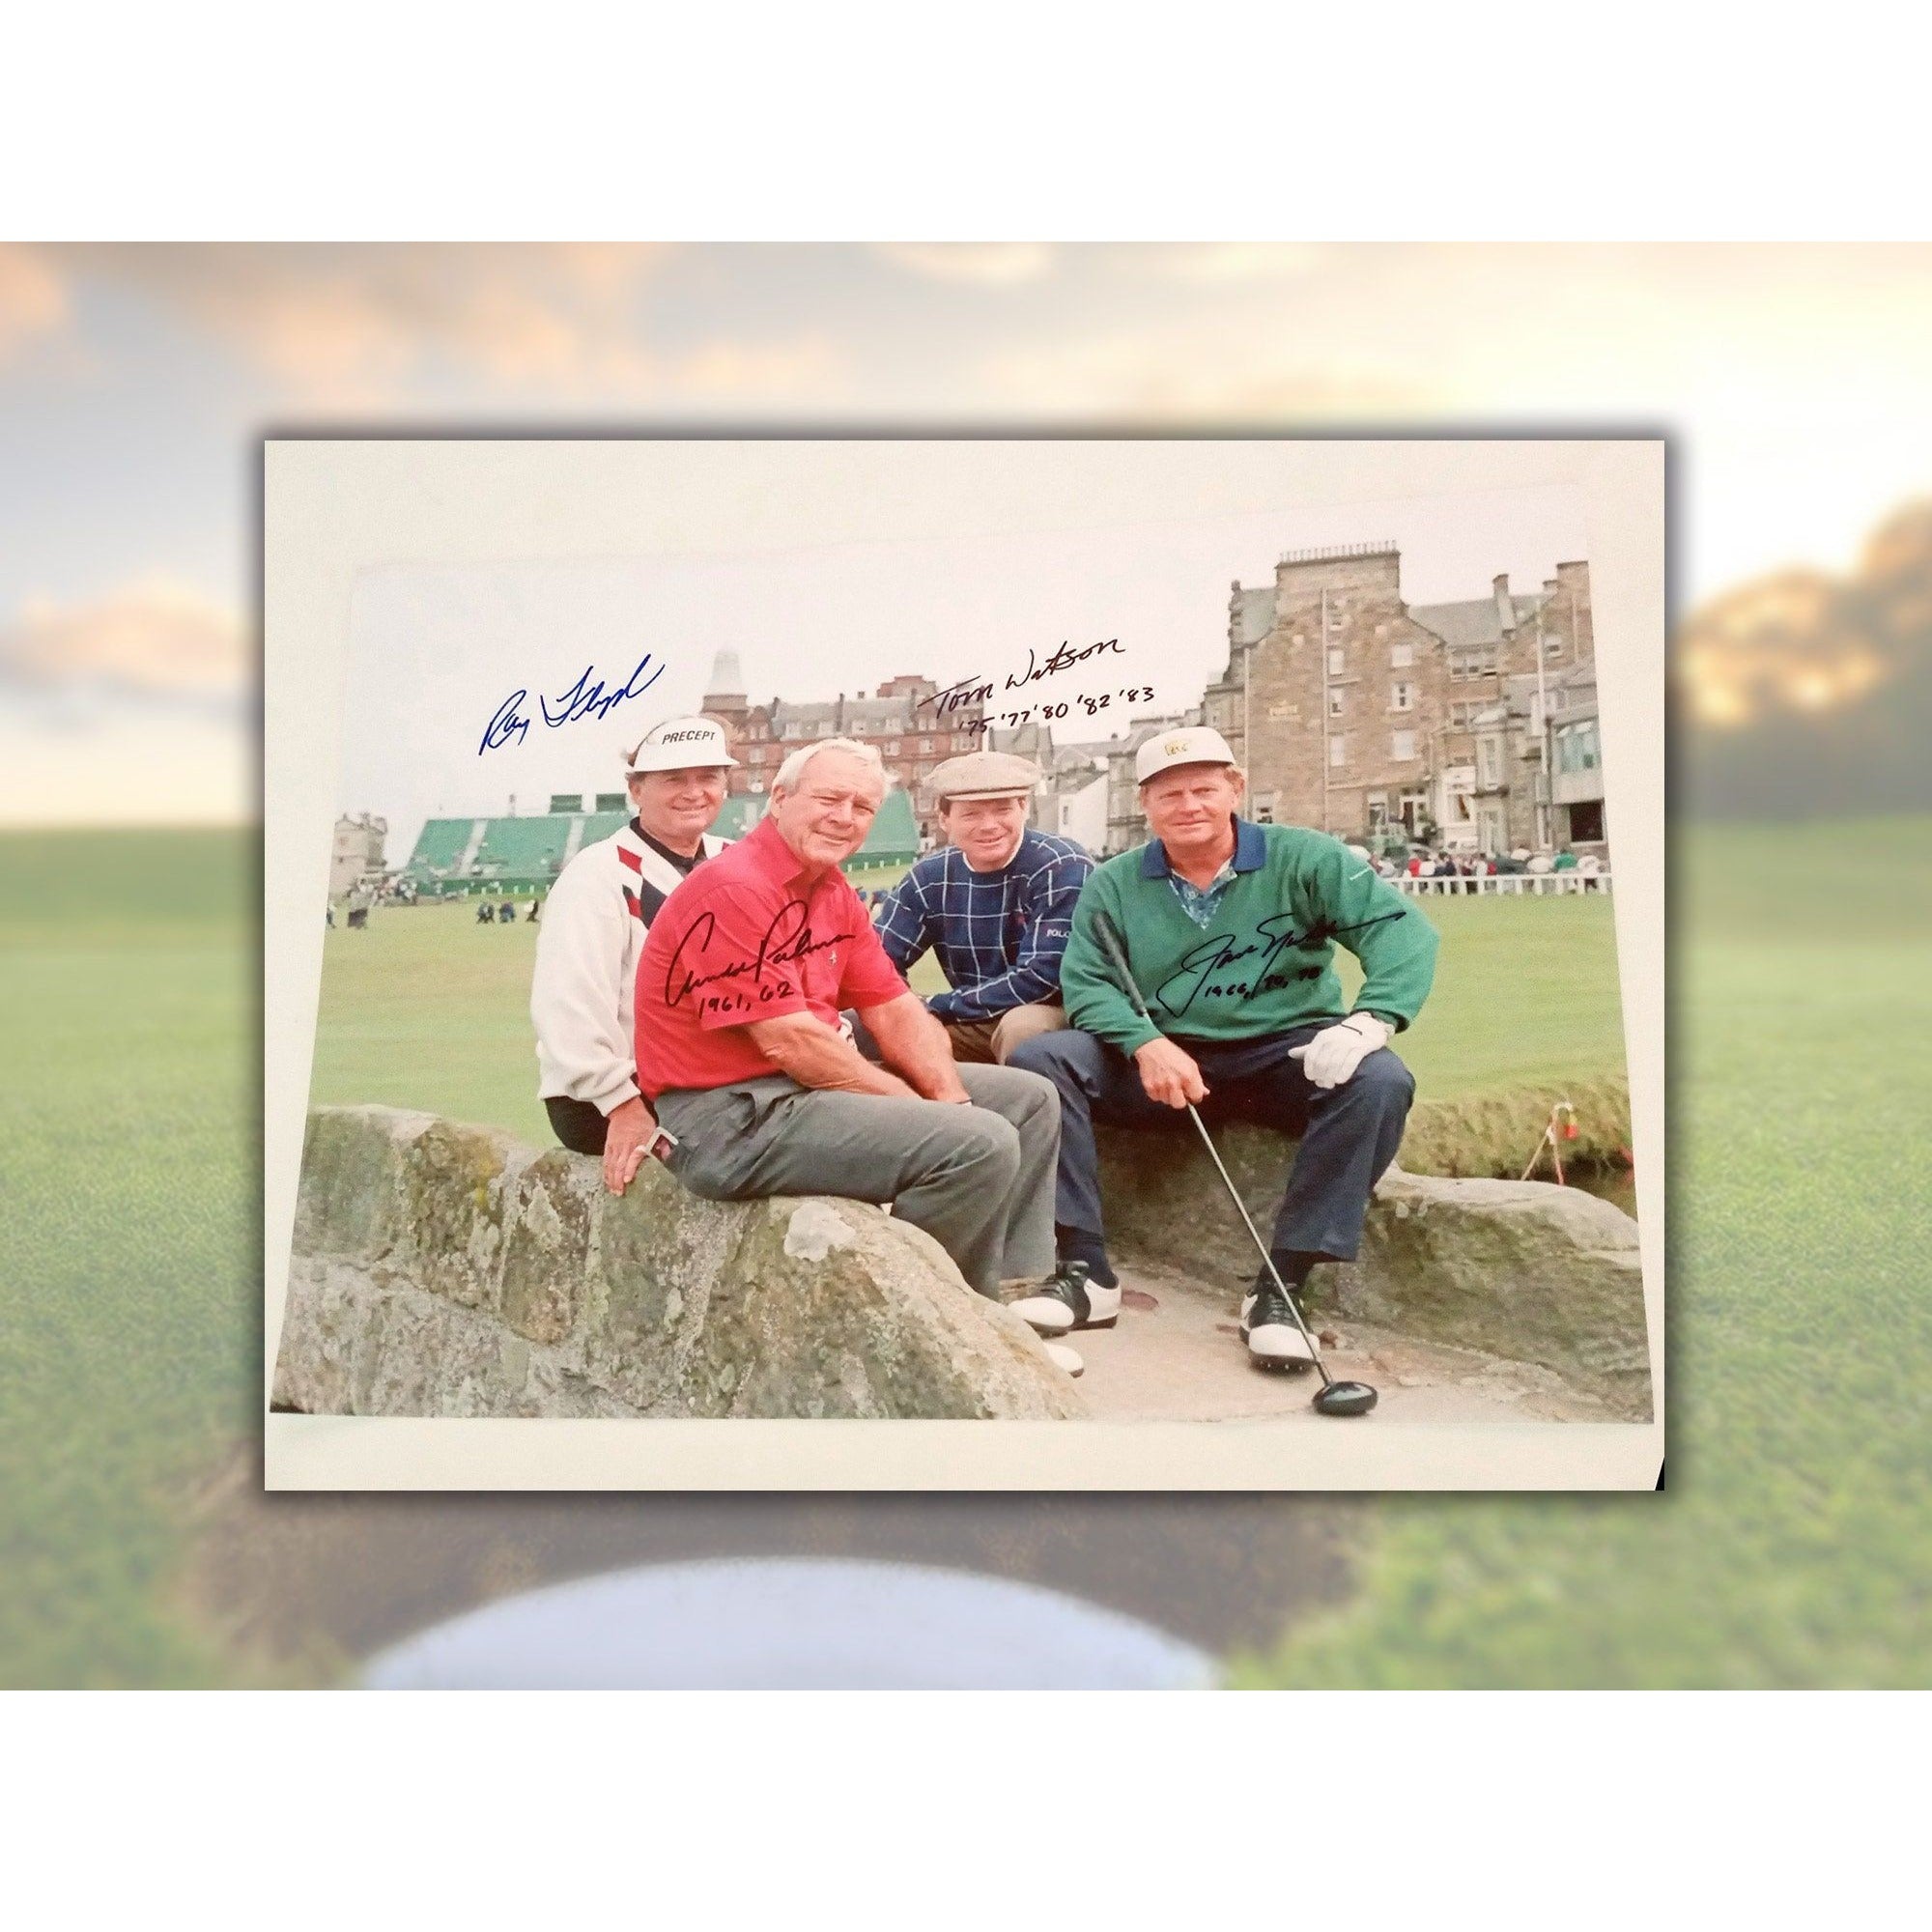 Arnold Palmer, Tom Watson, Jack Nicklaus and Raymond Floyd 16 x 20 with proof